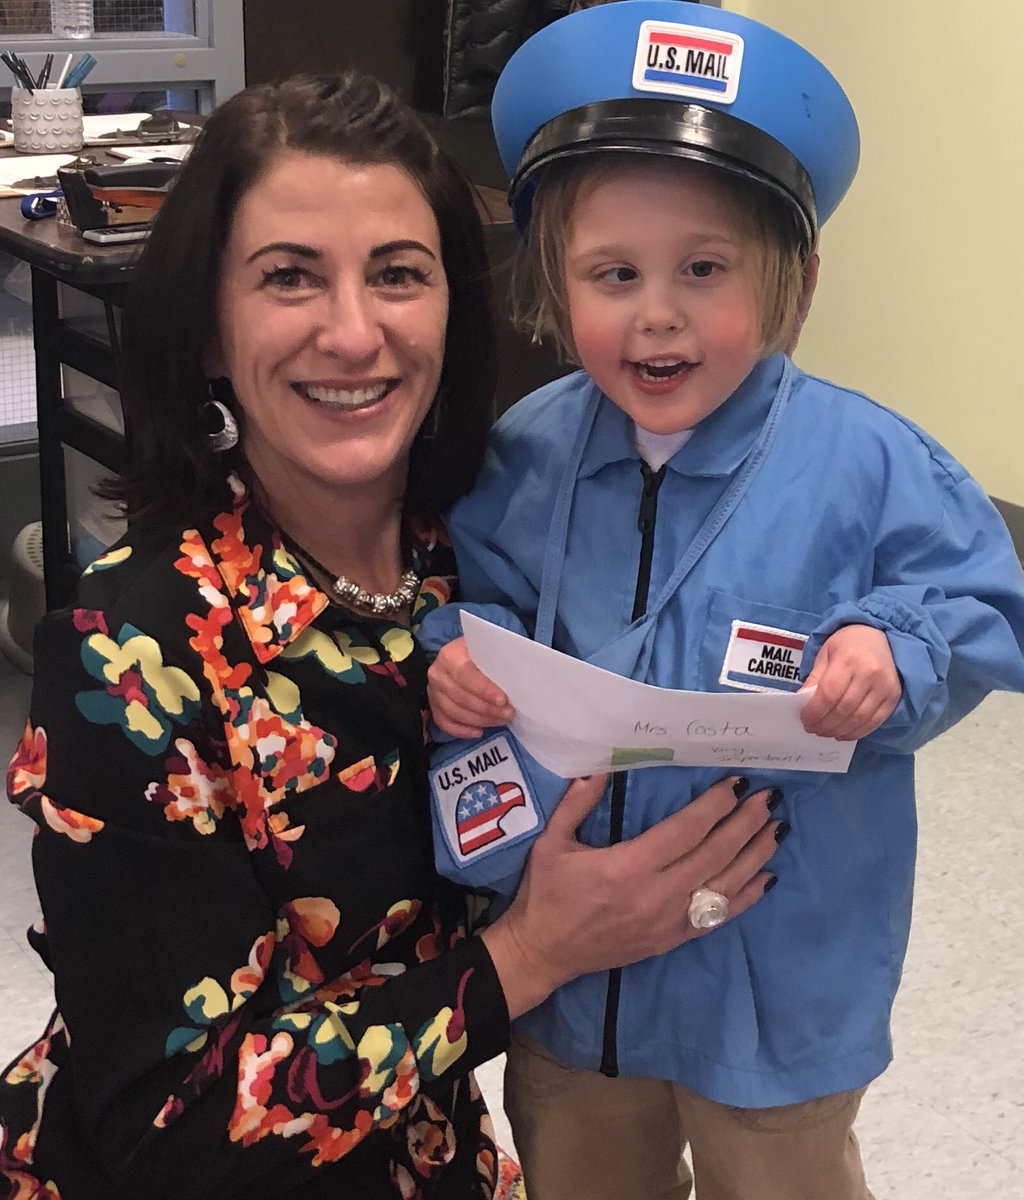 How lucky am I?...VERY. Just received mail from Shining Stars beautiful mail carrier, Juliet. She earned it in Mrs Verdura’s Blue Stars Class. Smiling HUGE. 
@MilfordSchools 
@mpsSpedDirector 
@PublicSel 
#shinestrong 
#MPSGreatThings 😊❤️